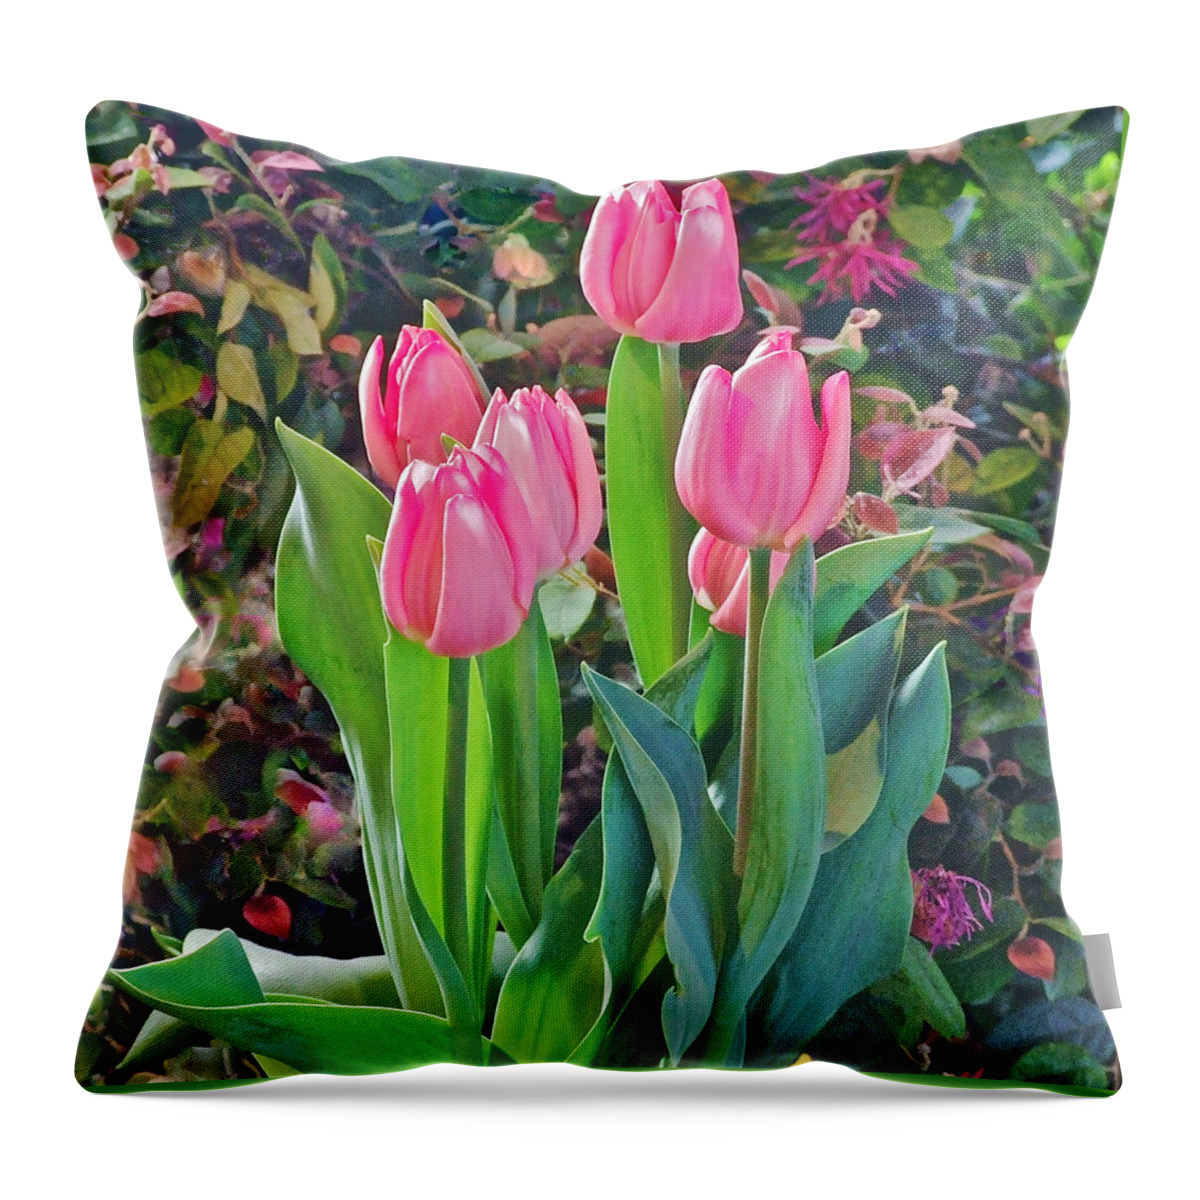 Tulips Throw Pillow featuring the photograph Spring Show 14 Pink Tulips by Janis Senungetuk